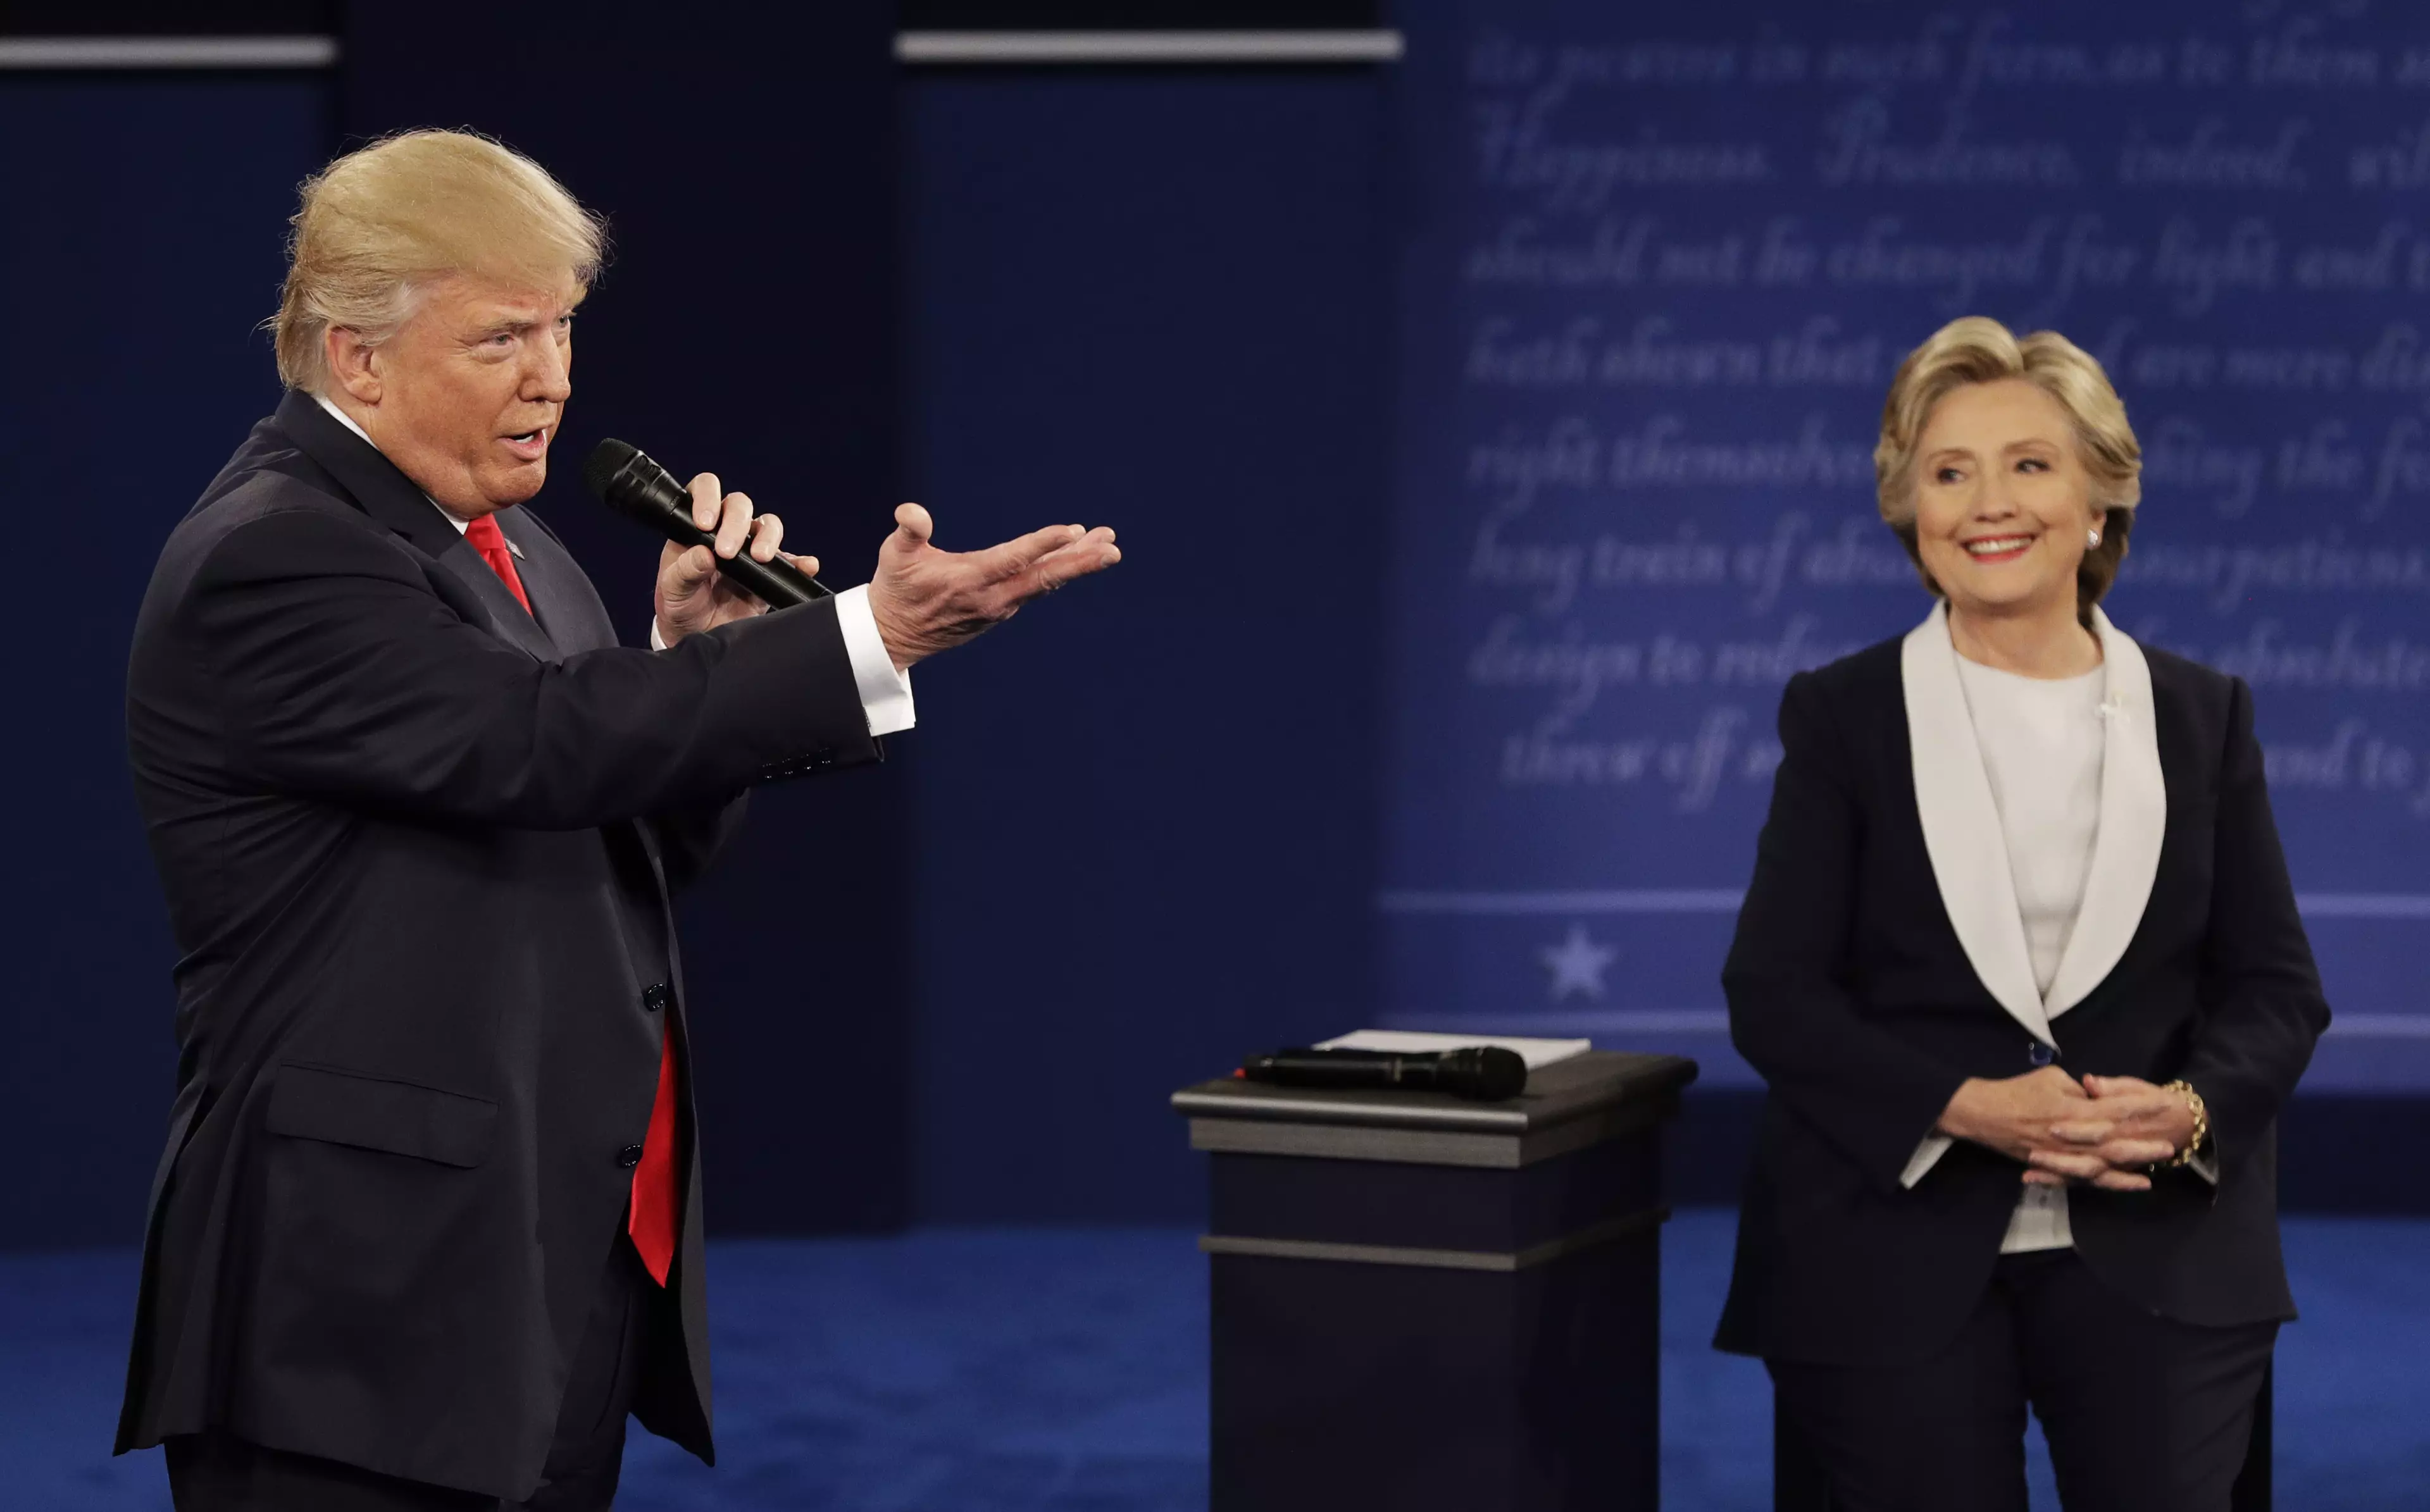 Trump Burns Hillary At The Presidential Debate And The Crowd Loses It